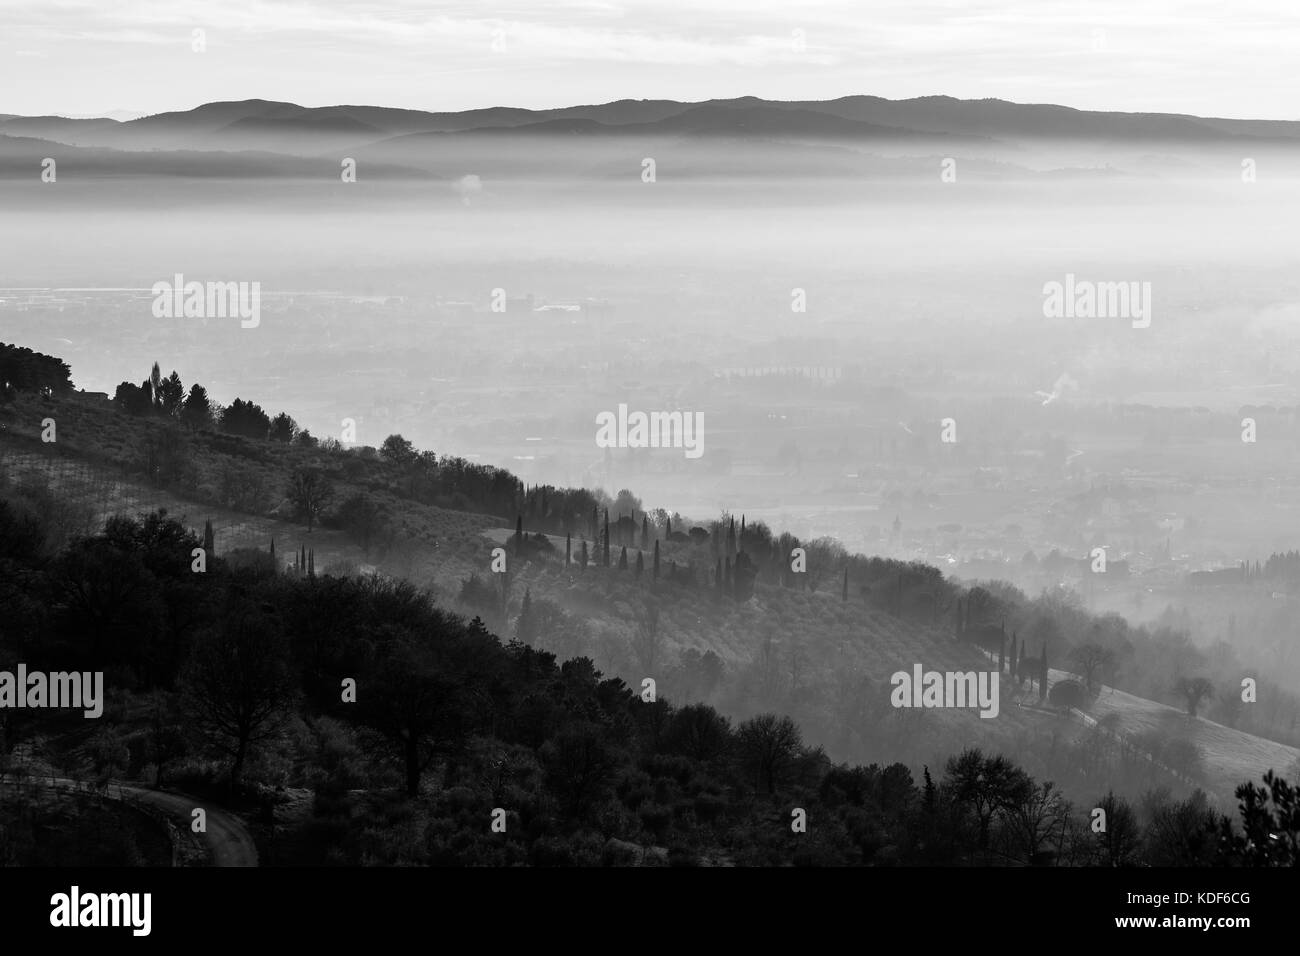 A valley filled by mist, with hills and trees in the foreground Stock Photo